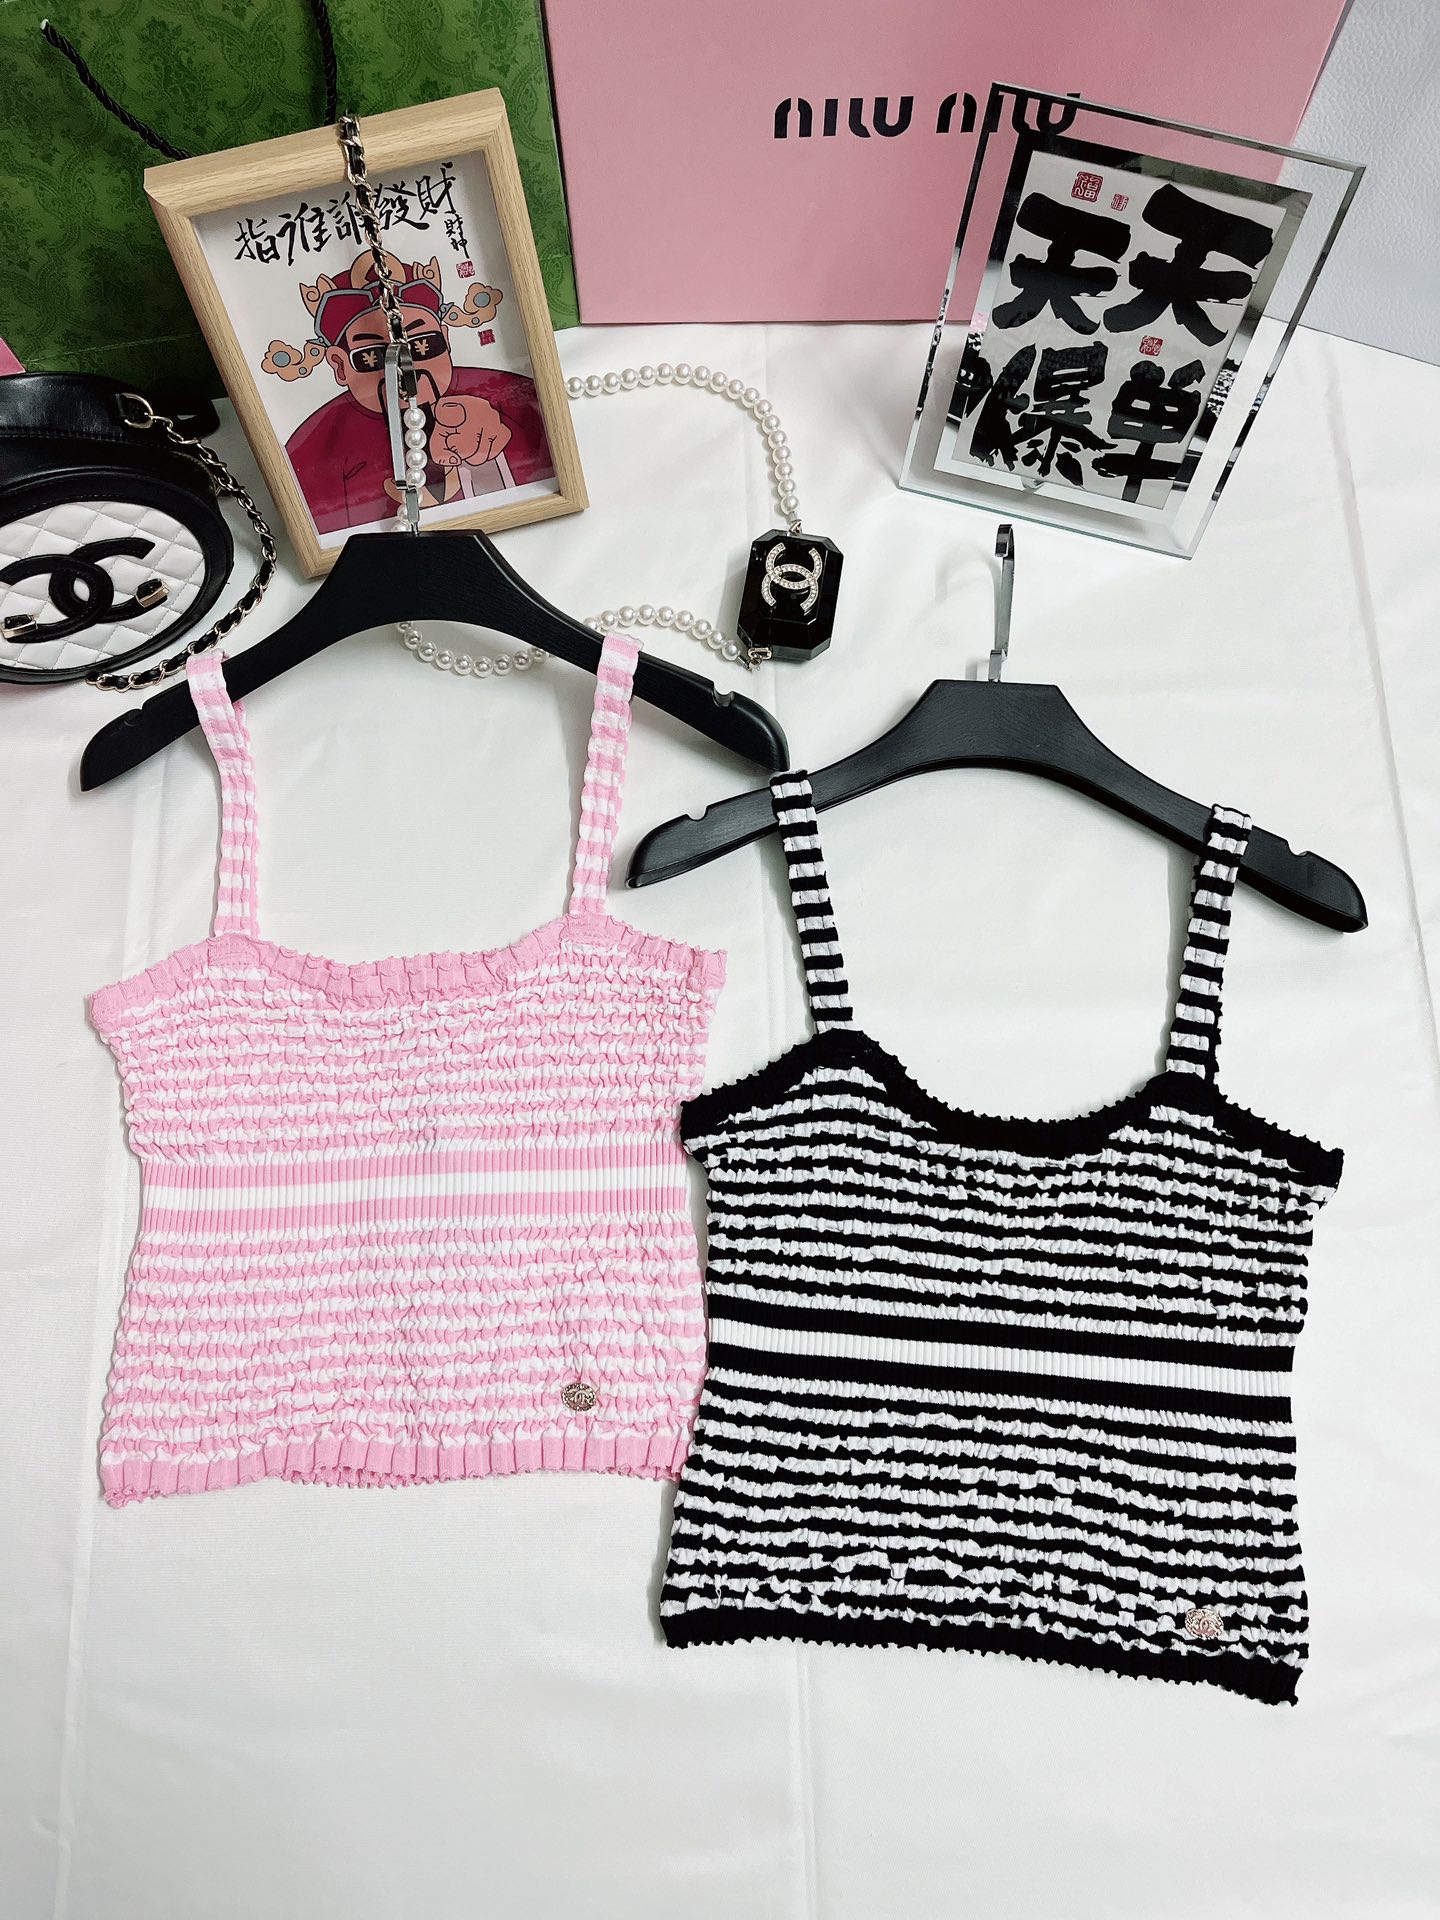 Buy High Quality Cheap Hot Replica
 Chanel Clothing Tank Tops&Camis Black Pink White Knitting Spring/Summer Collection Vintage